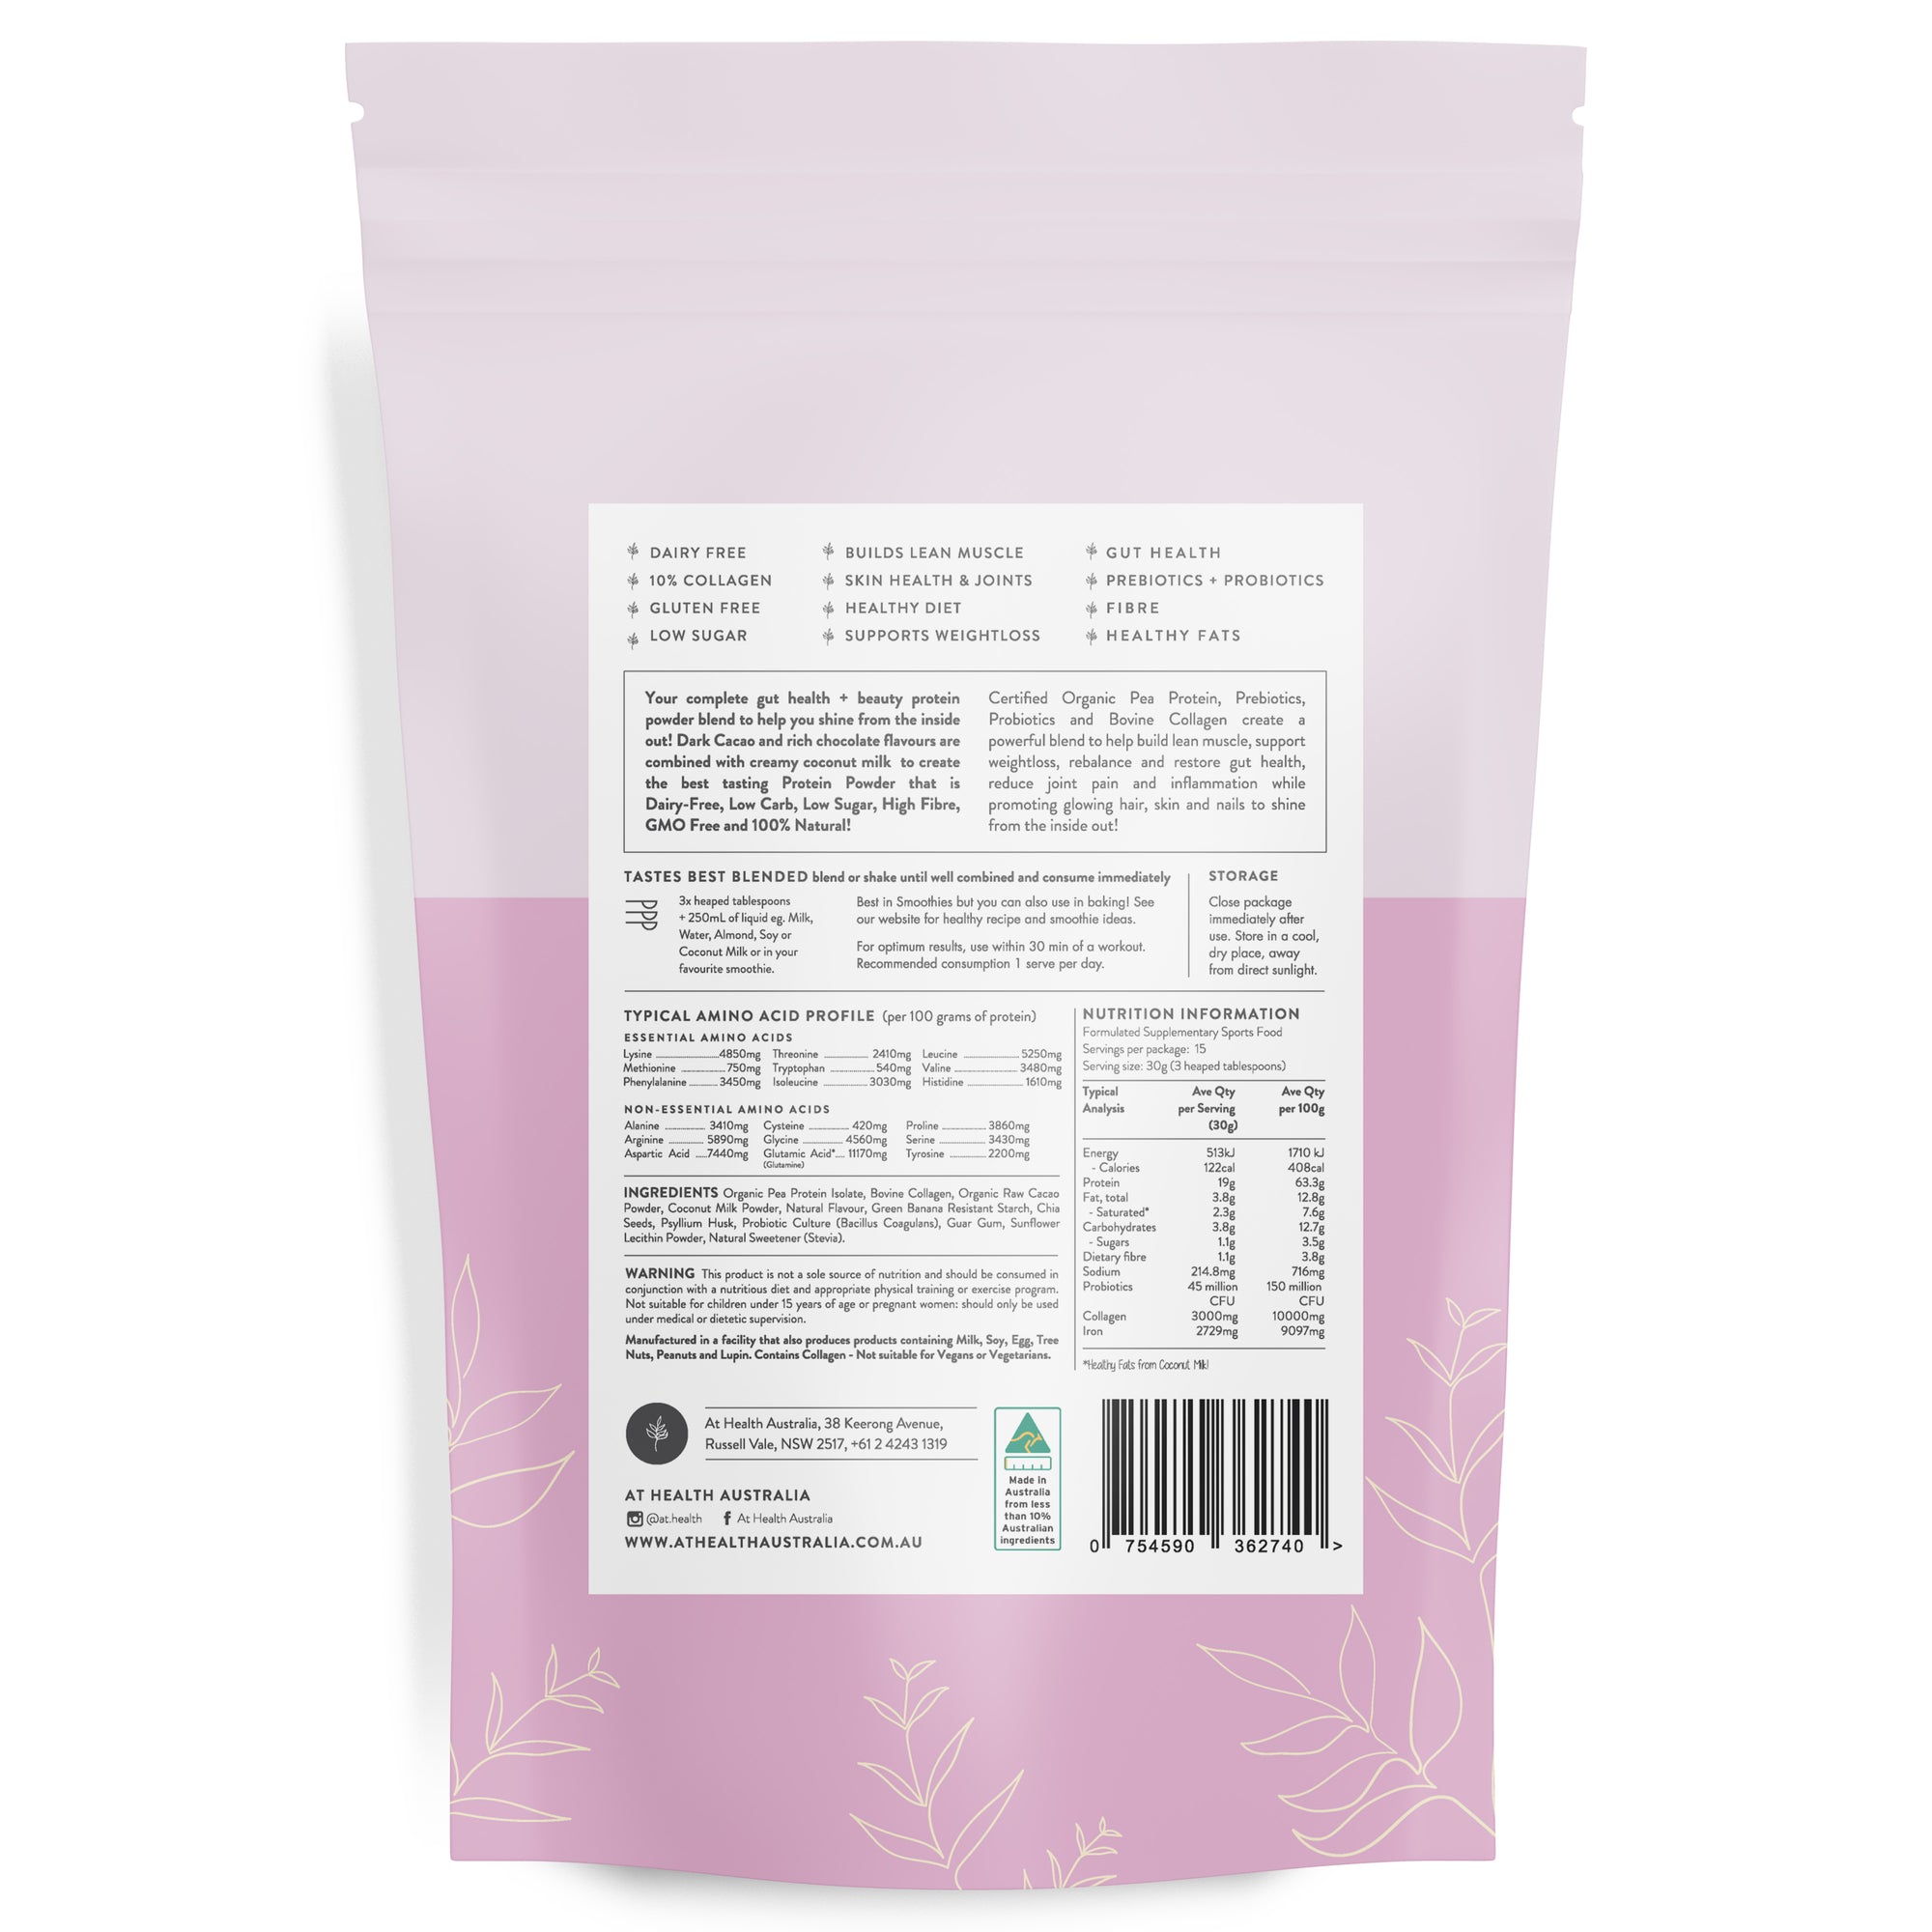 Radiant Body Protein Powder with Collagen - Cacao